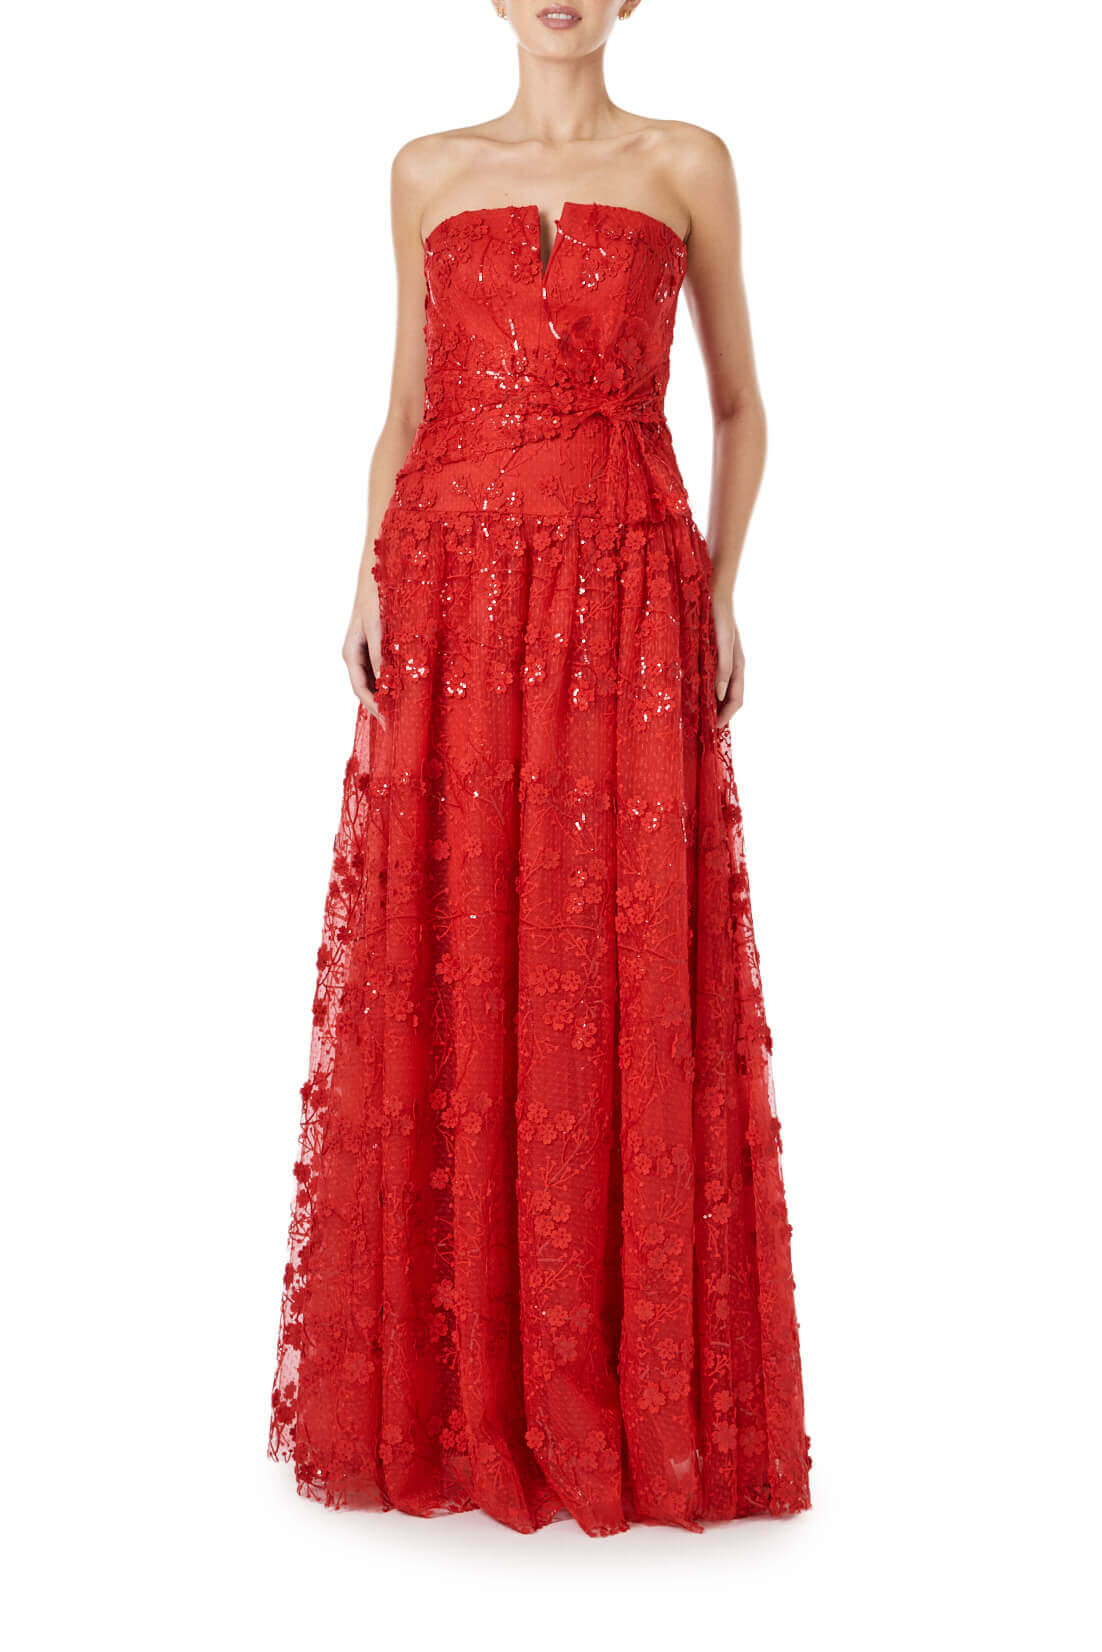 ML Monique Lhuillier red embroidered tulle long dress with strapless bodice and drop waist.